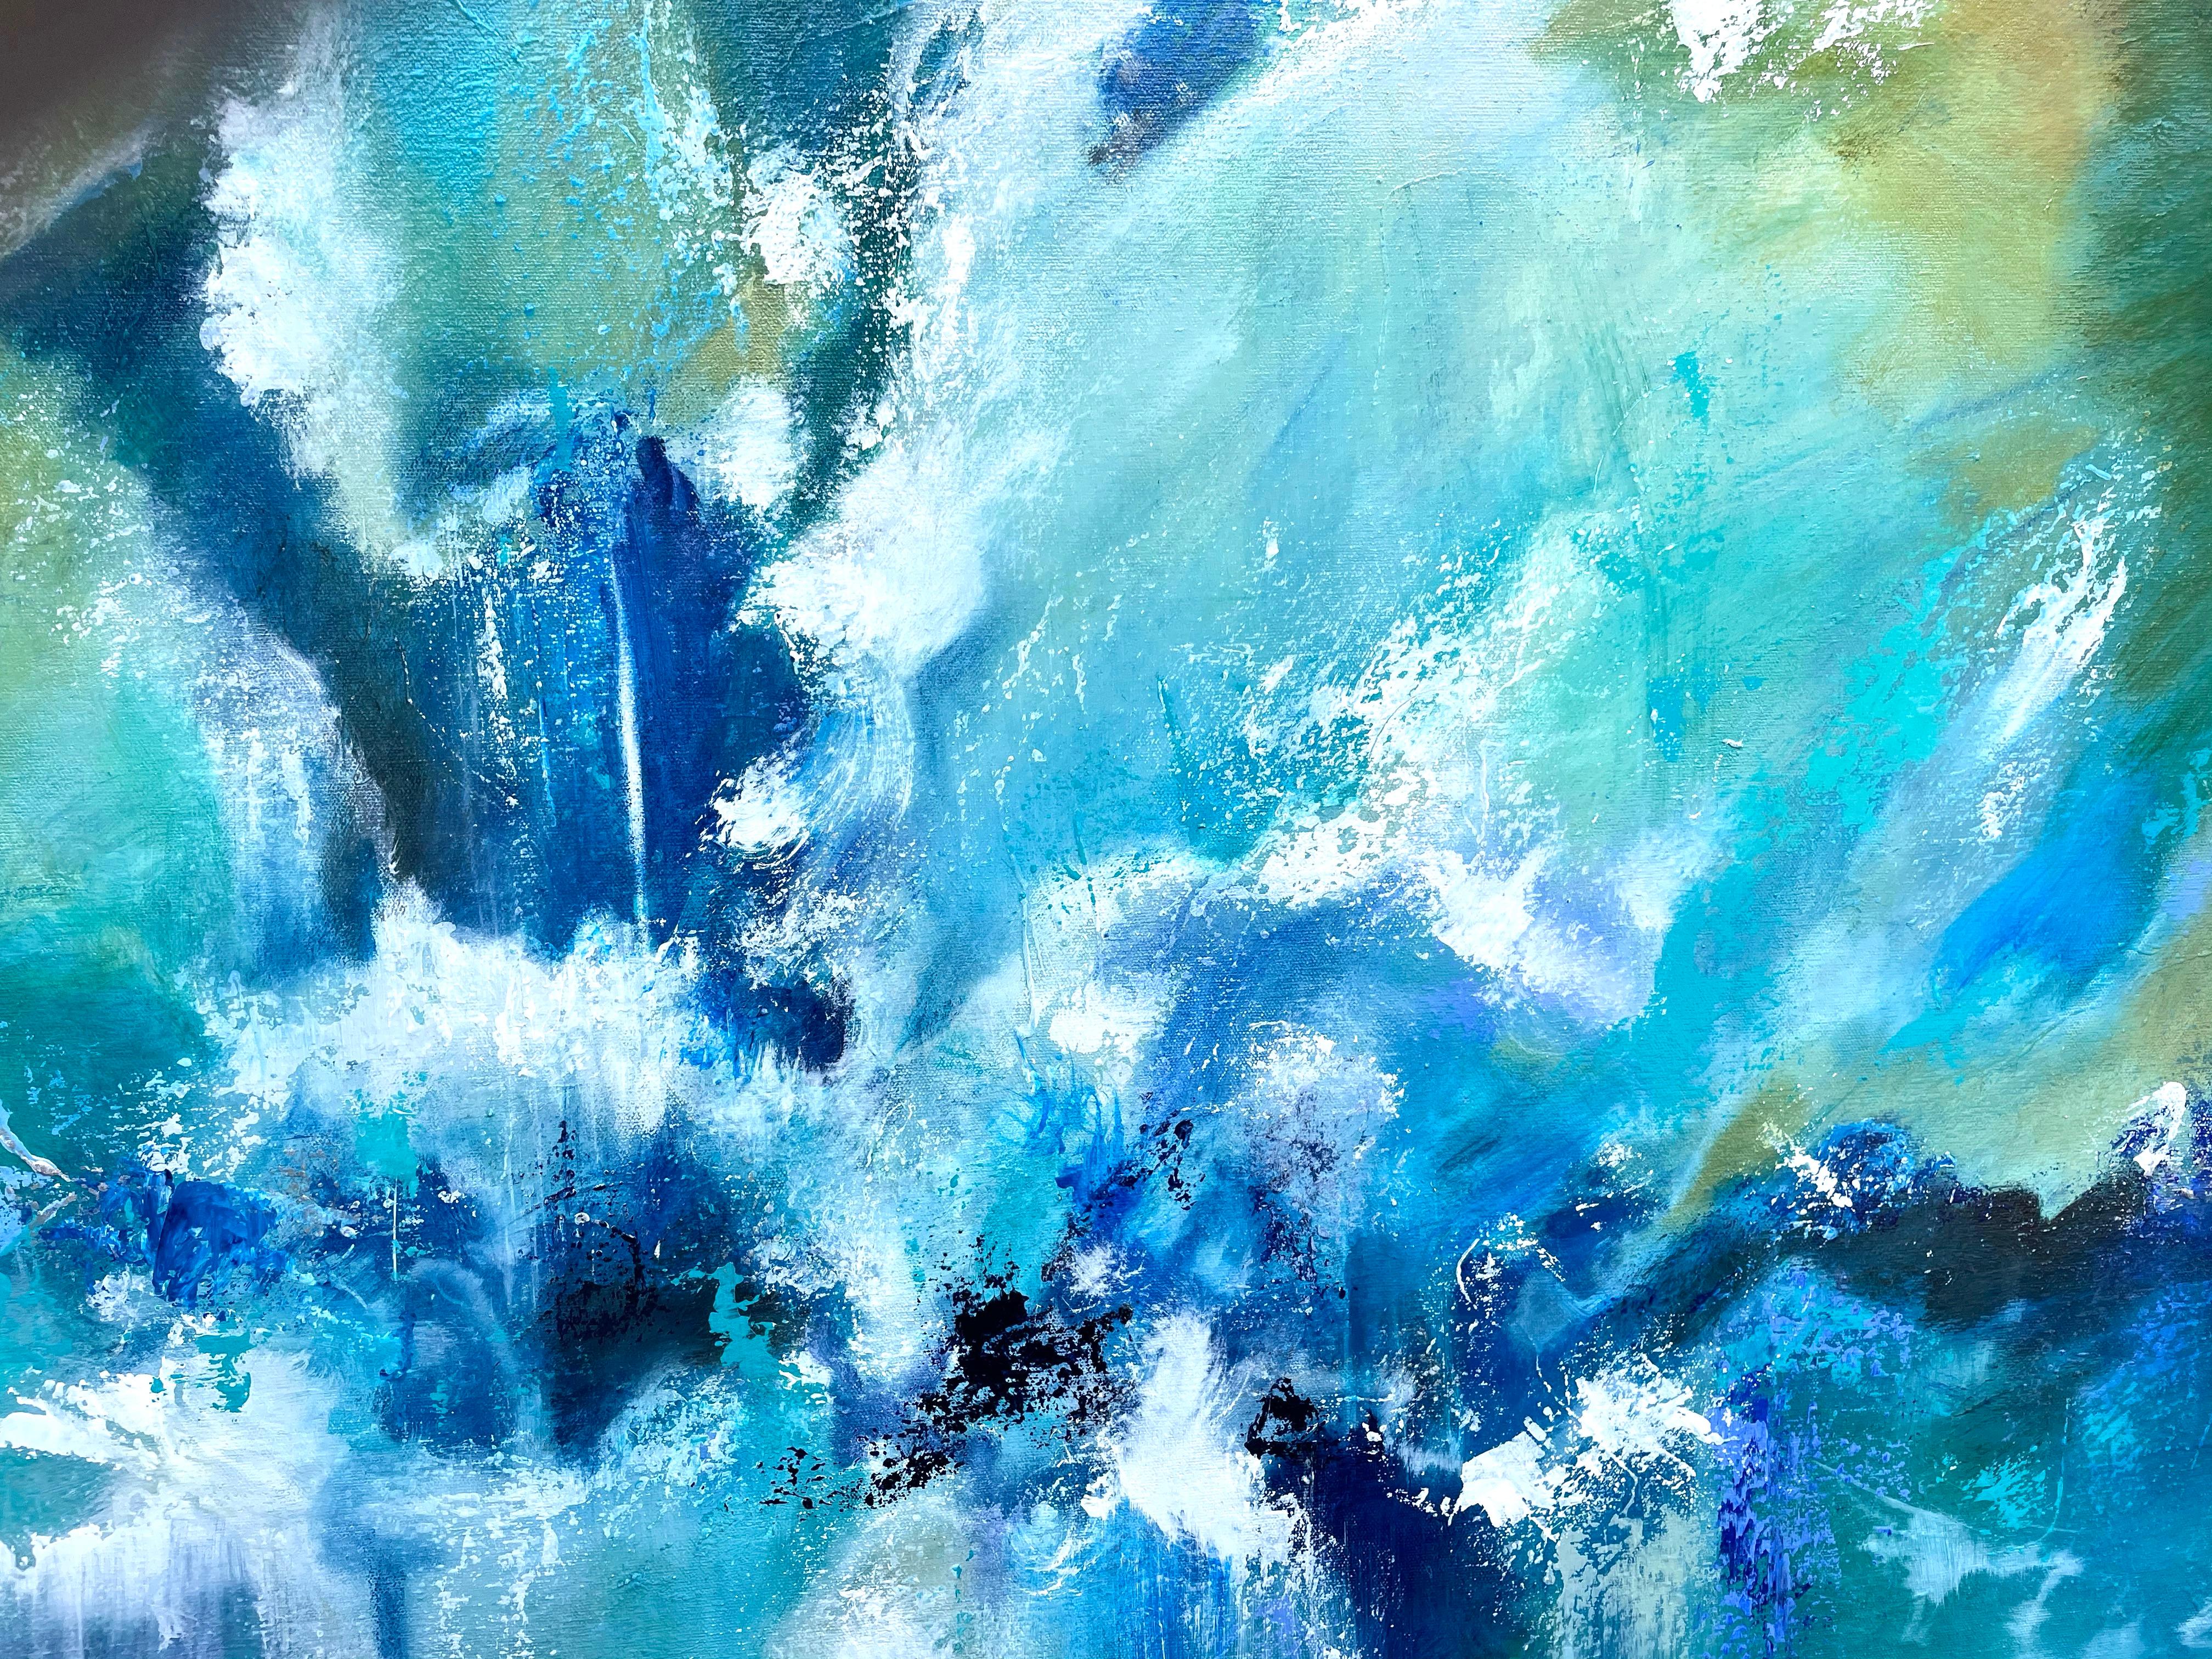 <p>Artist Comments<br>Painted while listening to Blues music, artist DL Watson created this radiant abstract using various tools to apply the paint. 